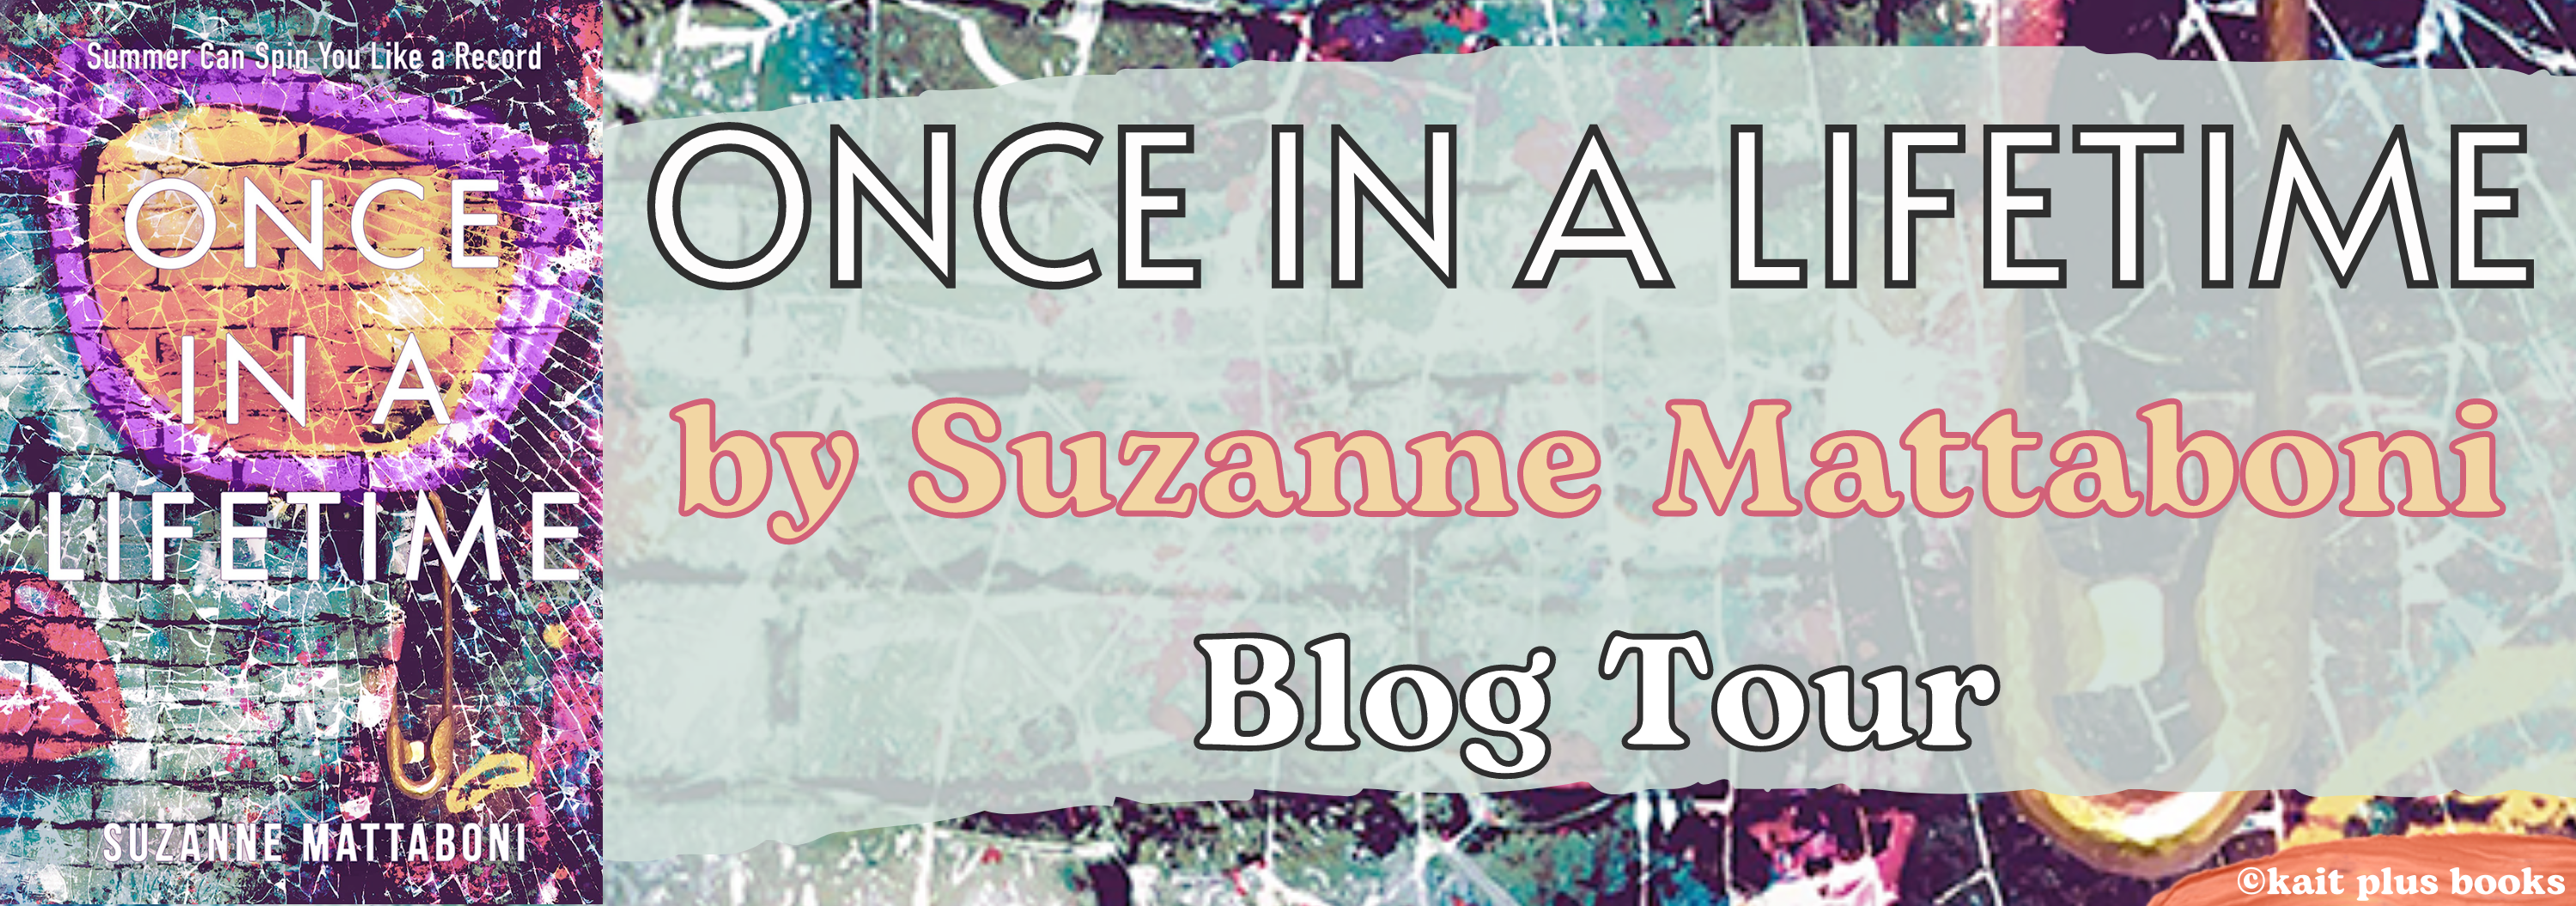 Blog Tour: Once in a Lifetime by Suzanne Mattaboni (Excerpt + Giveaway!)